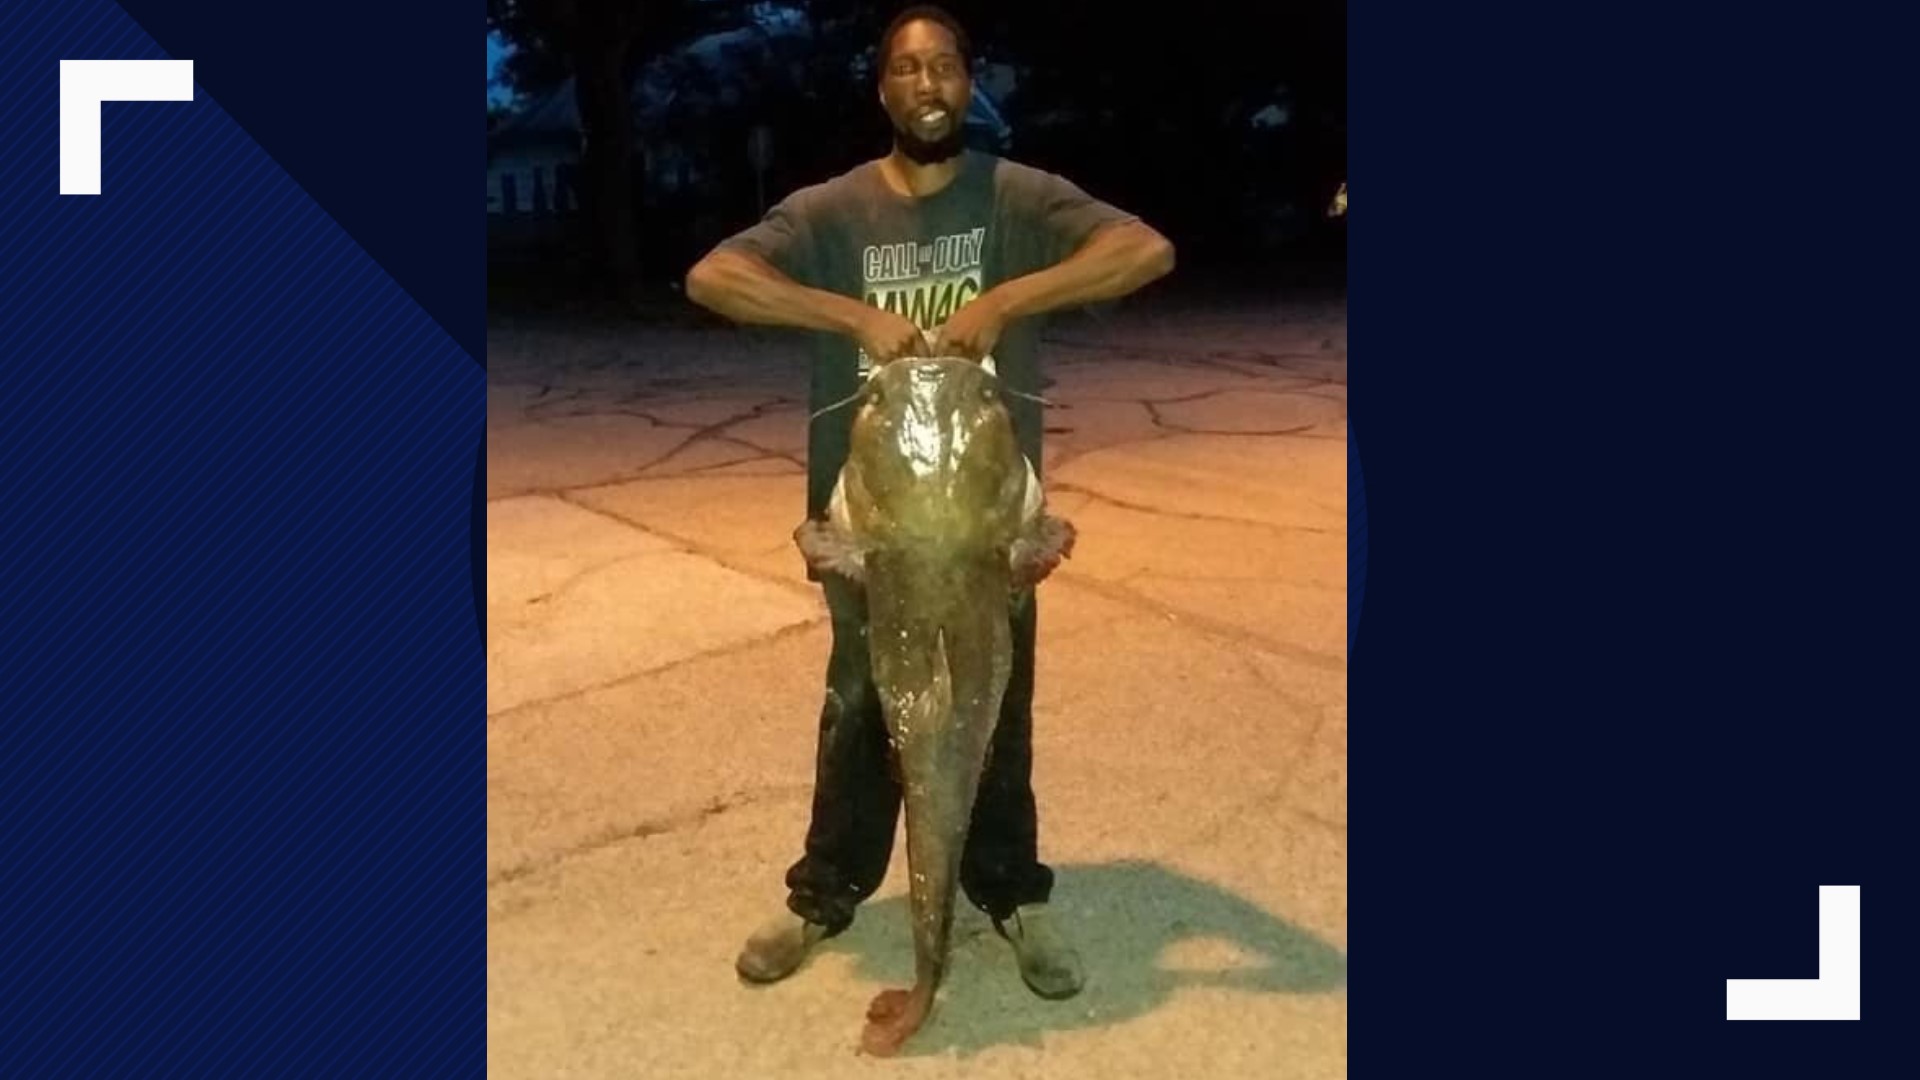 A local fisherman broke the previous Waco record with a 64-pound flathead catfish he caught at the spillway in Lake Waco.